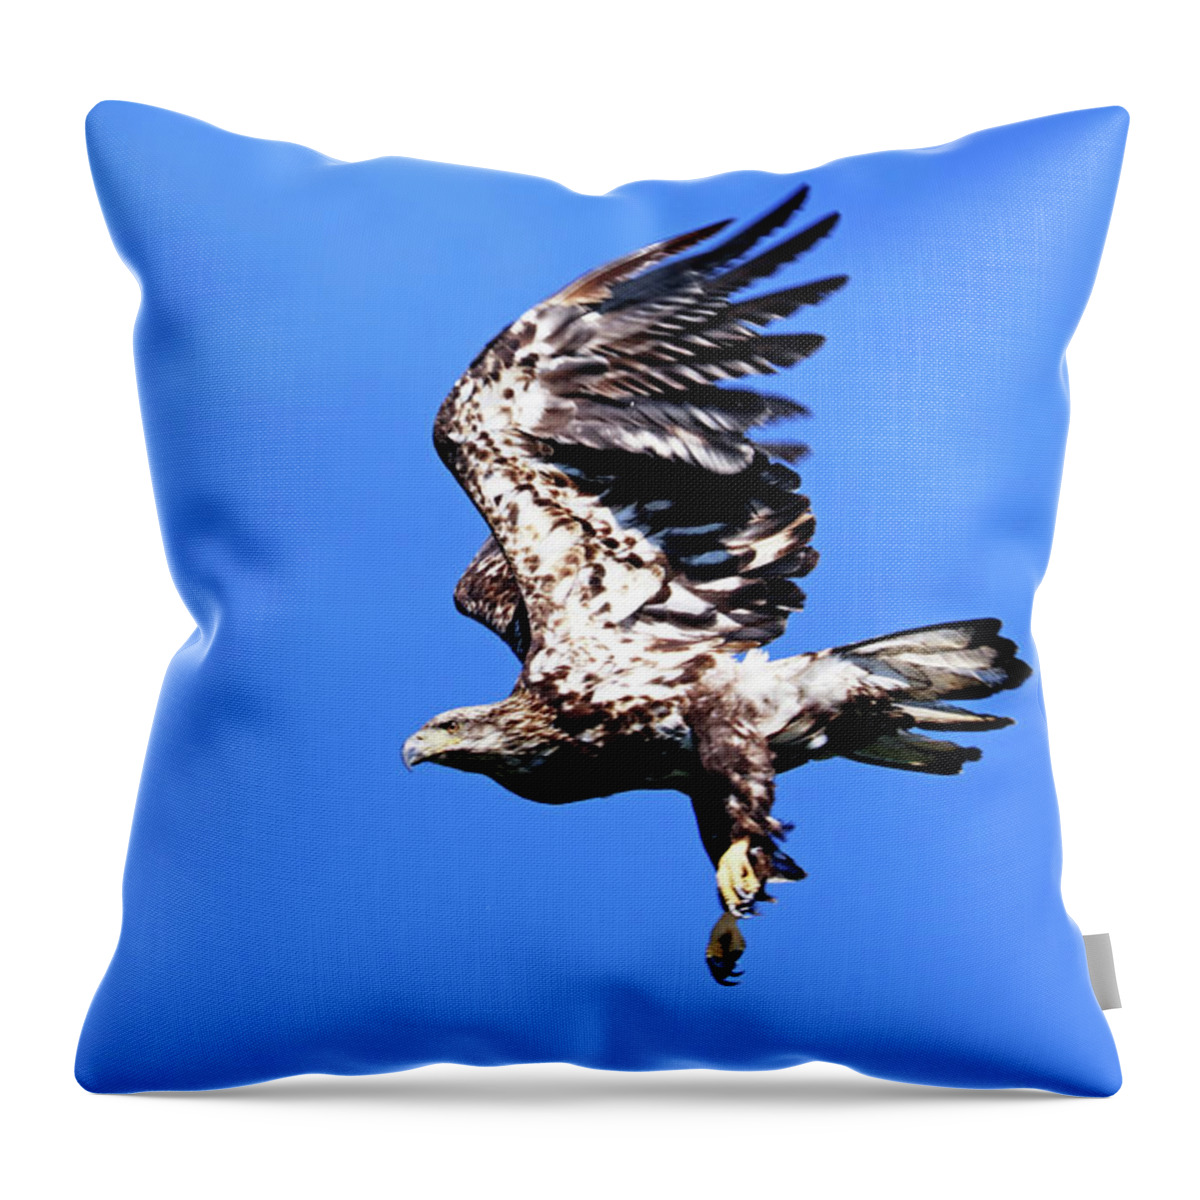 Eagle Throw Pillow featuring the photograph Juvenile Bald Eagle Take Off by Debbie Oppermann